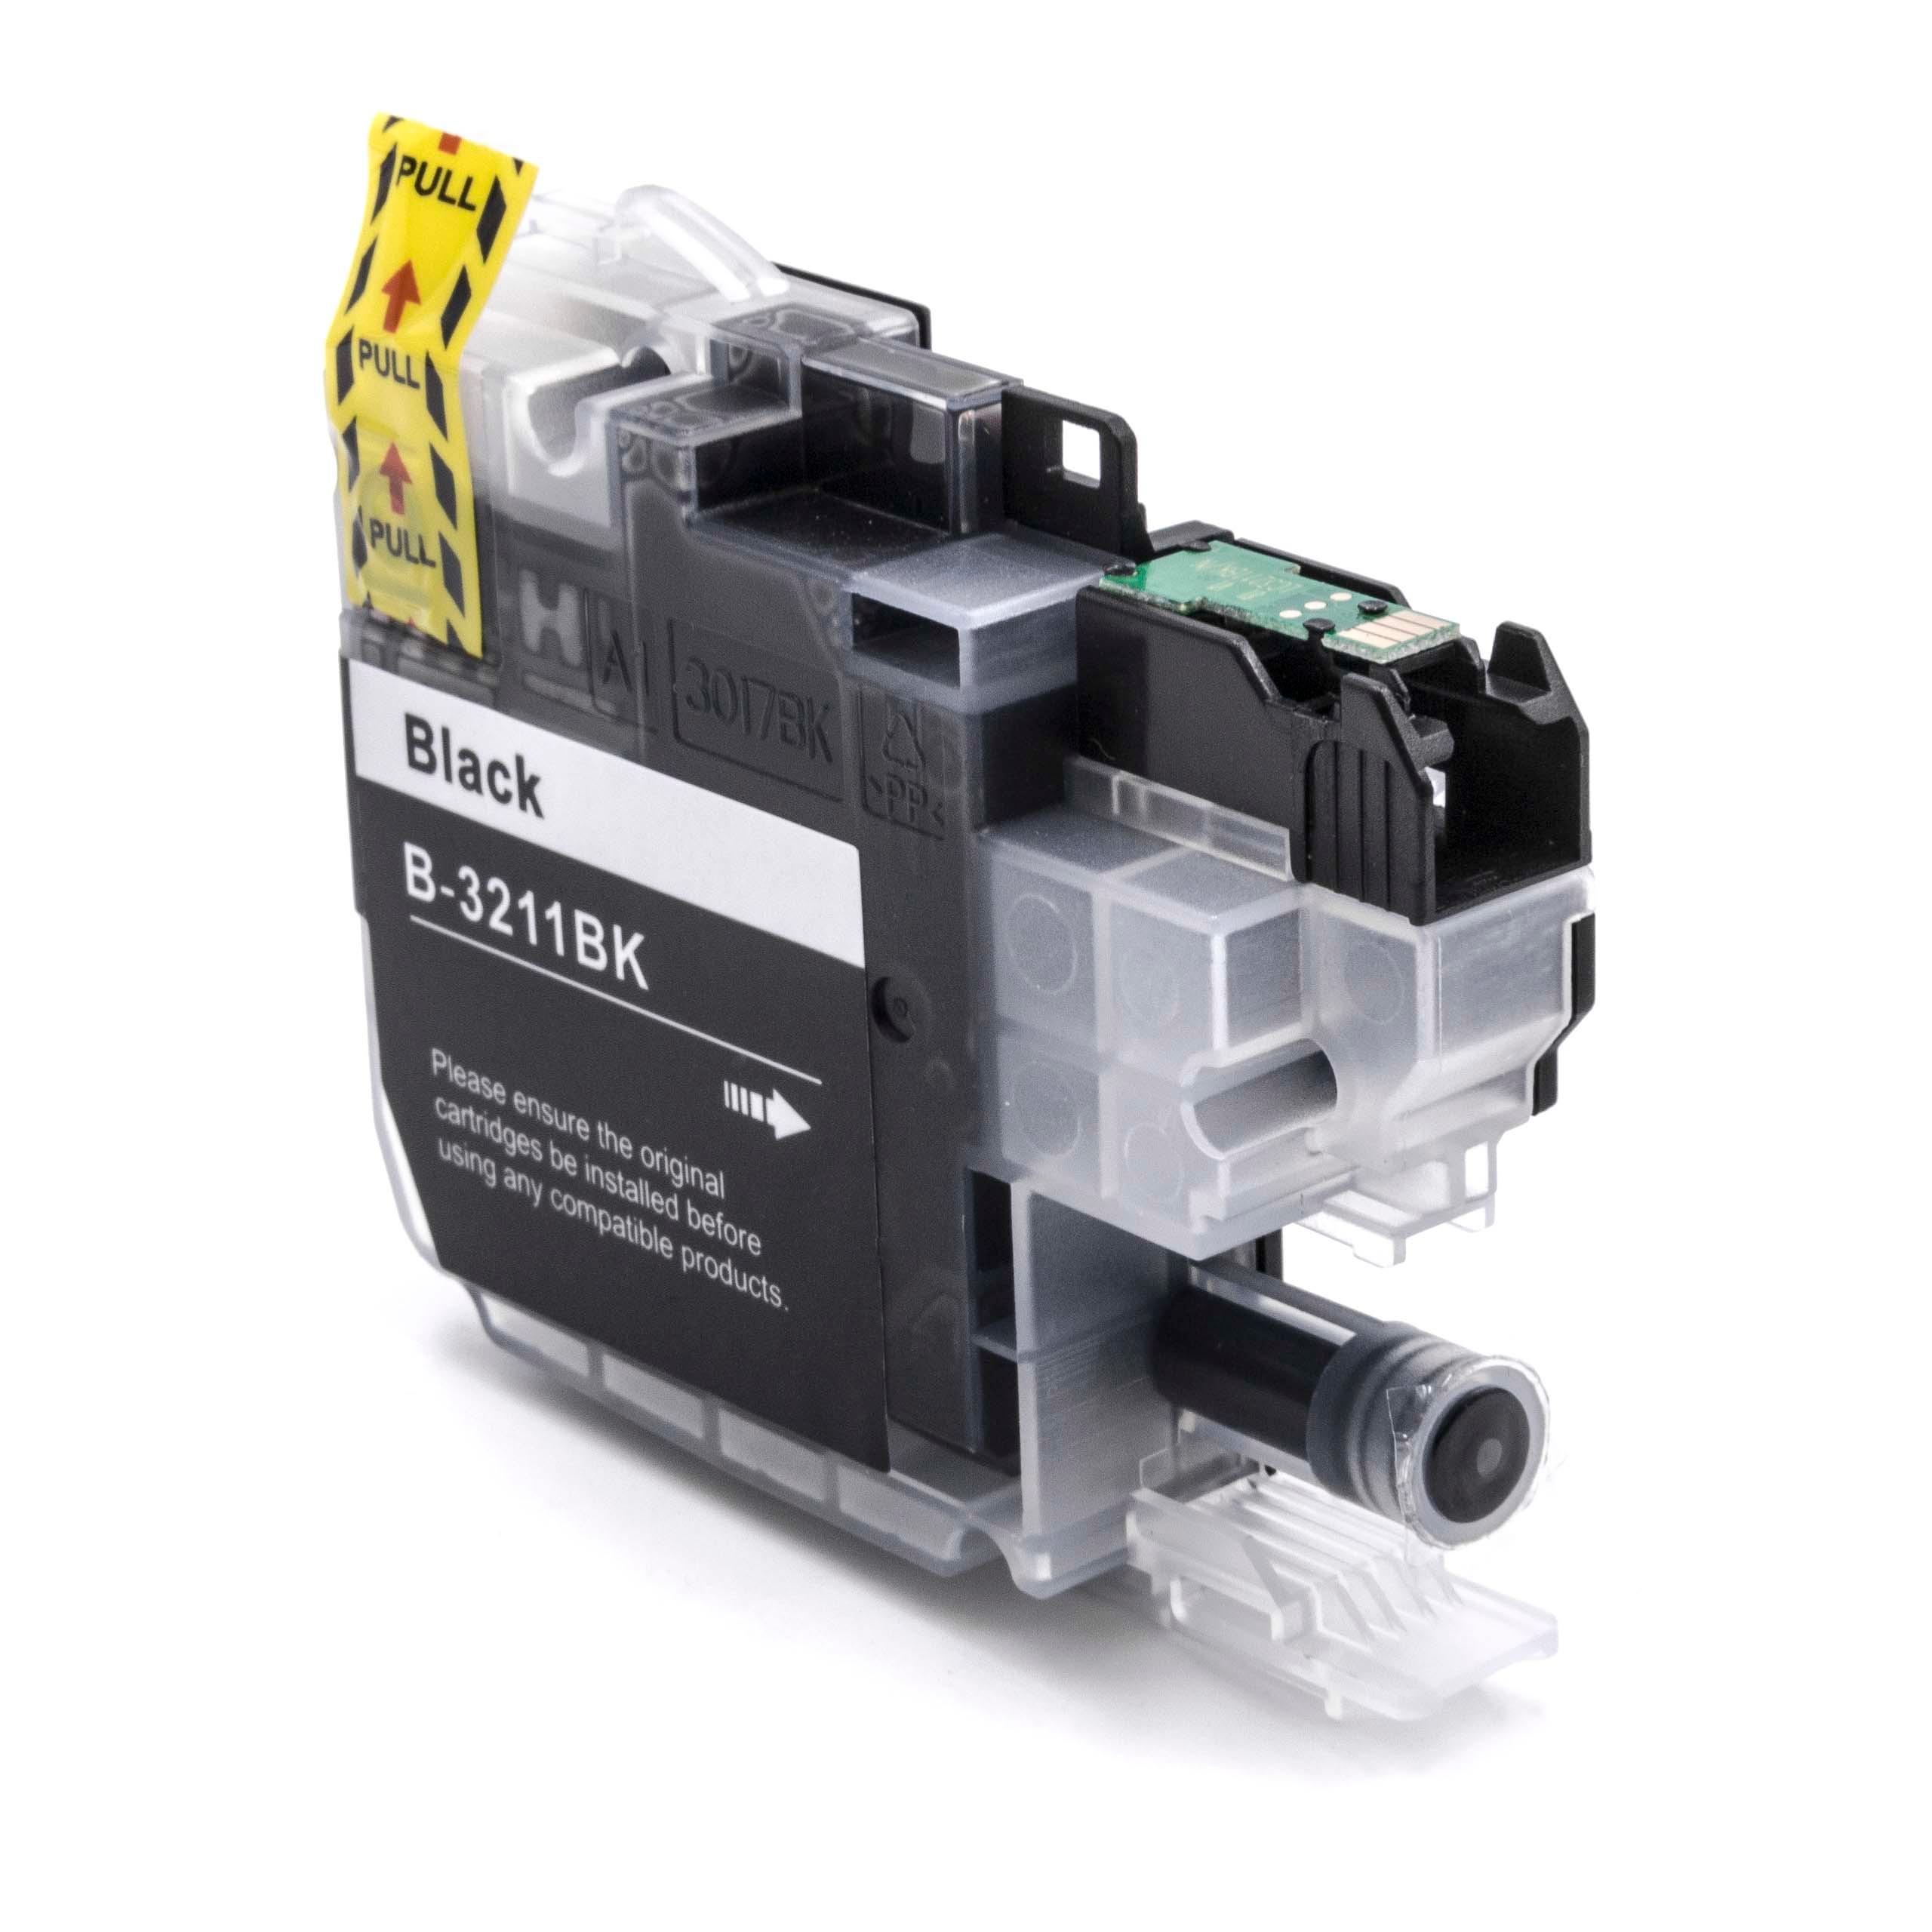 Ink Cartridge as Exchange for Brother LC-3211BK, LC3211BK for Brother Printer - Black 10 ml + Chip